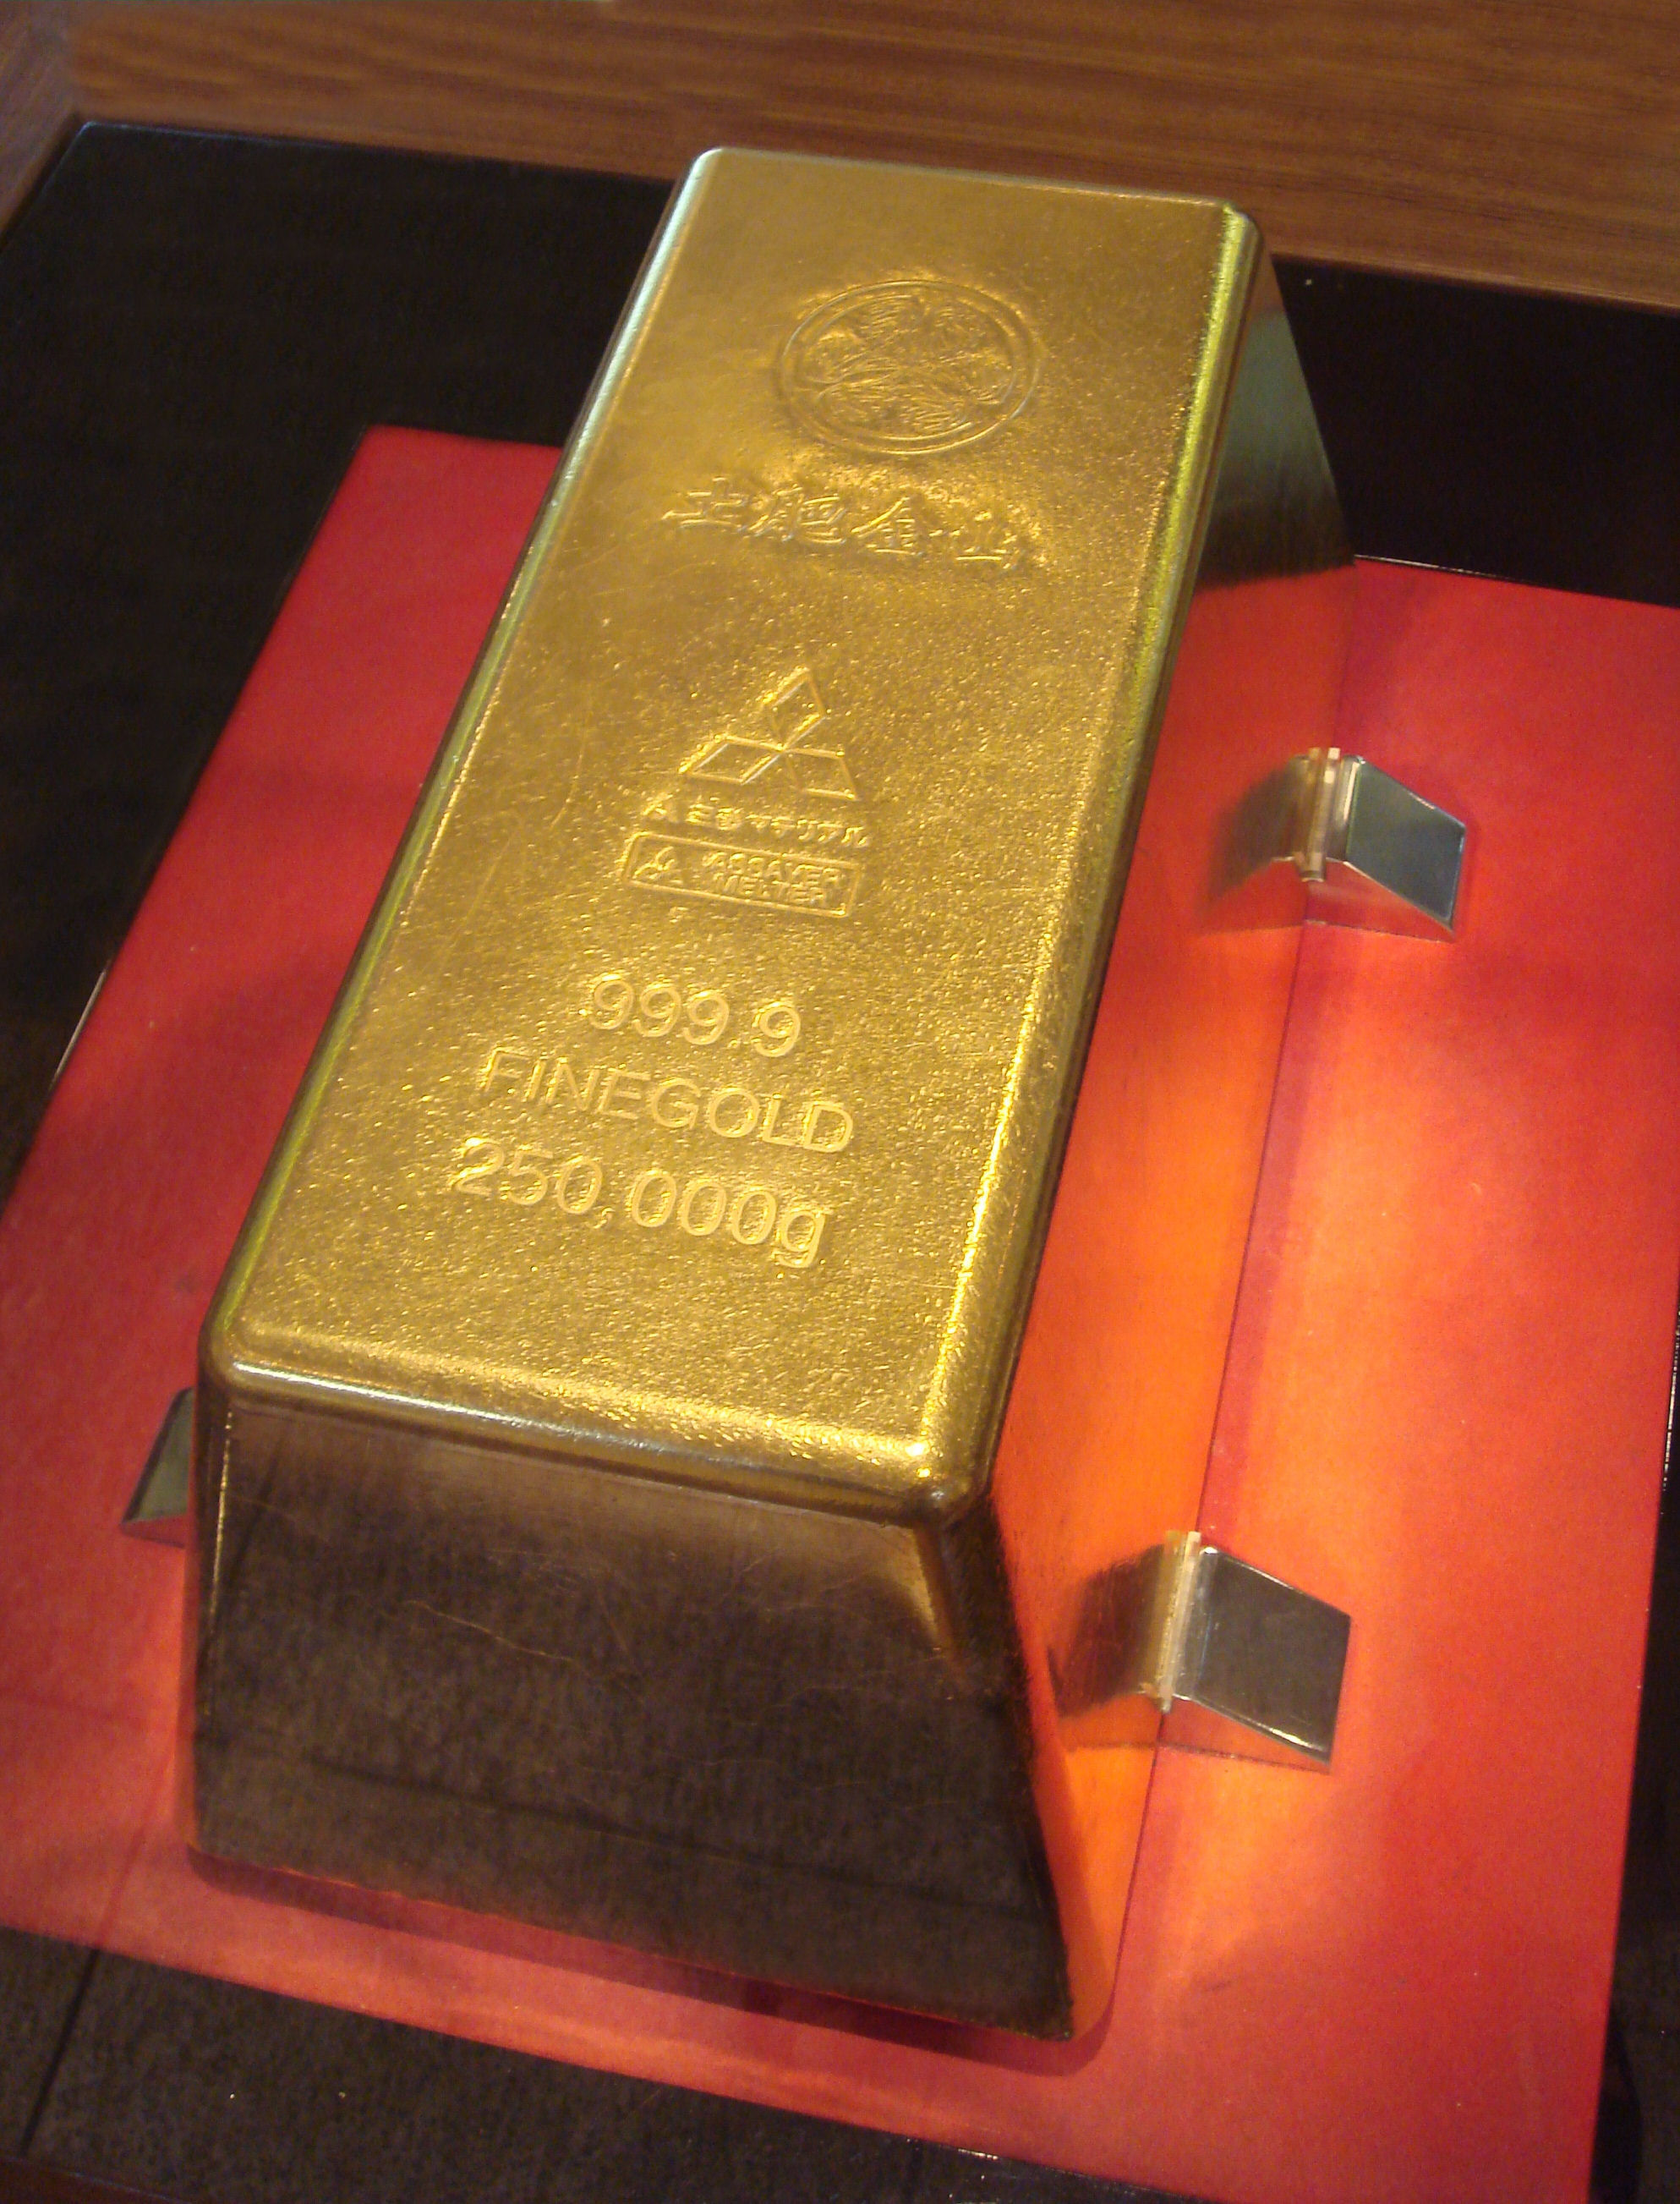 The world's largest gold bar